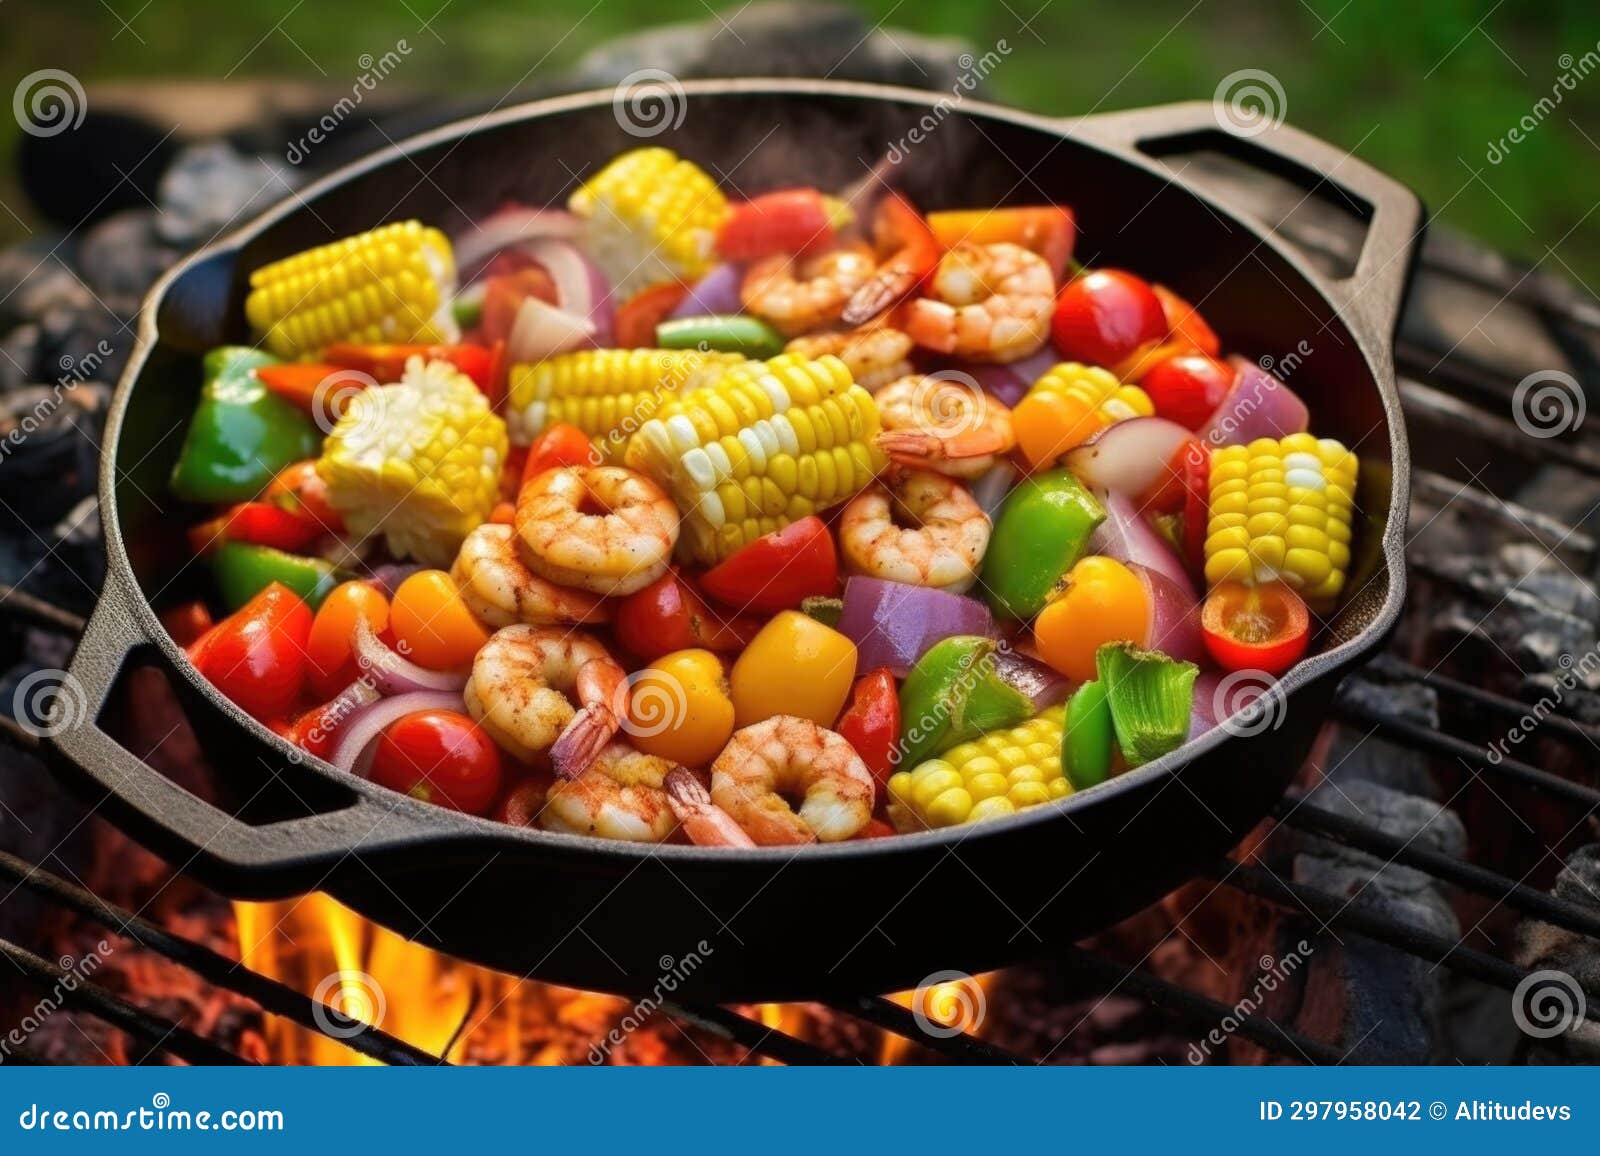 A Delicious Shrimp Boil Cooking in a Campfire Skillet Stock Photo ...